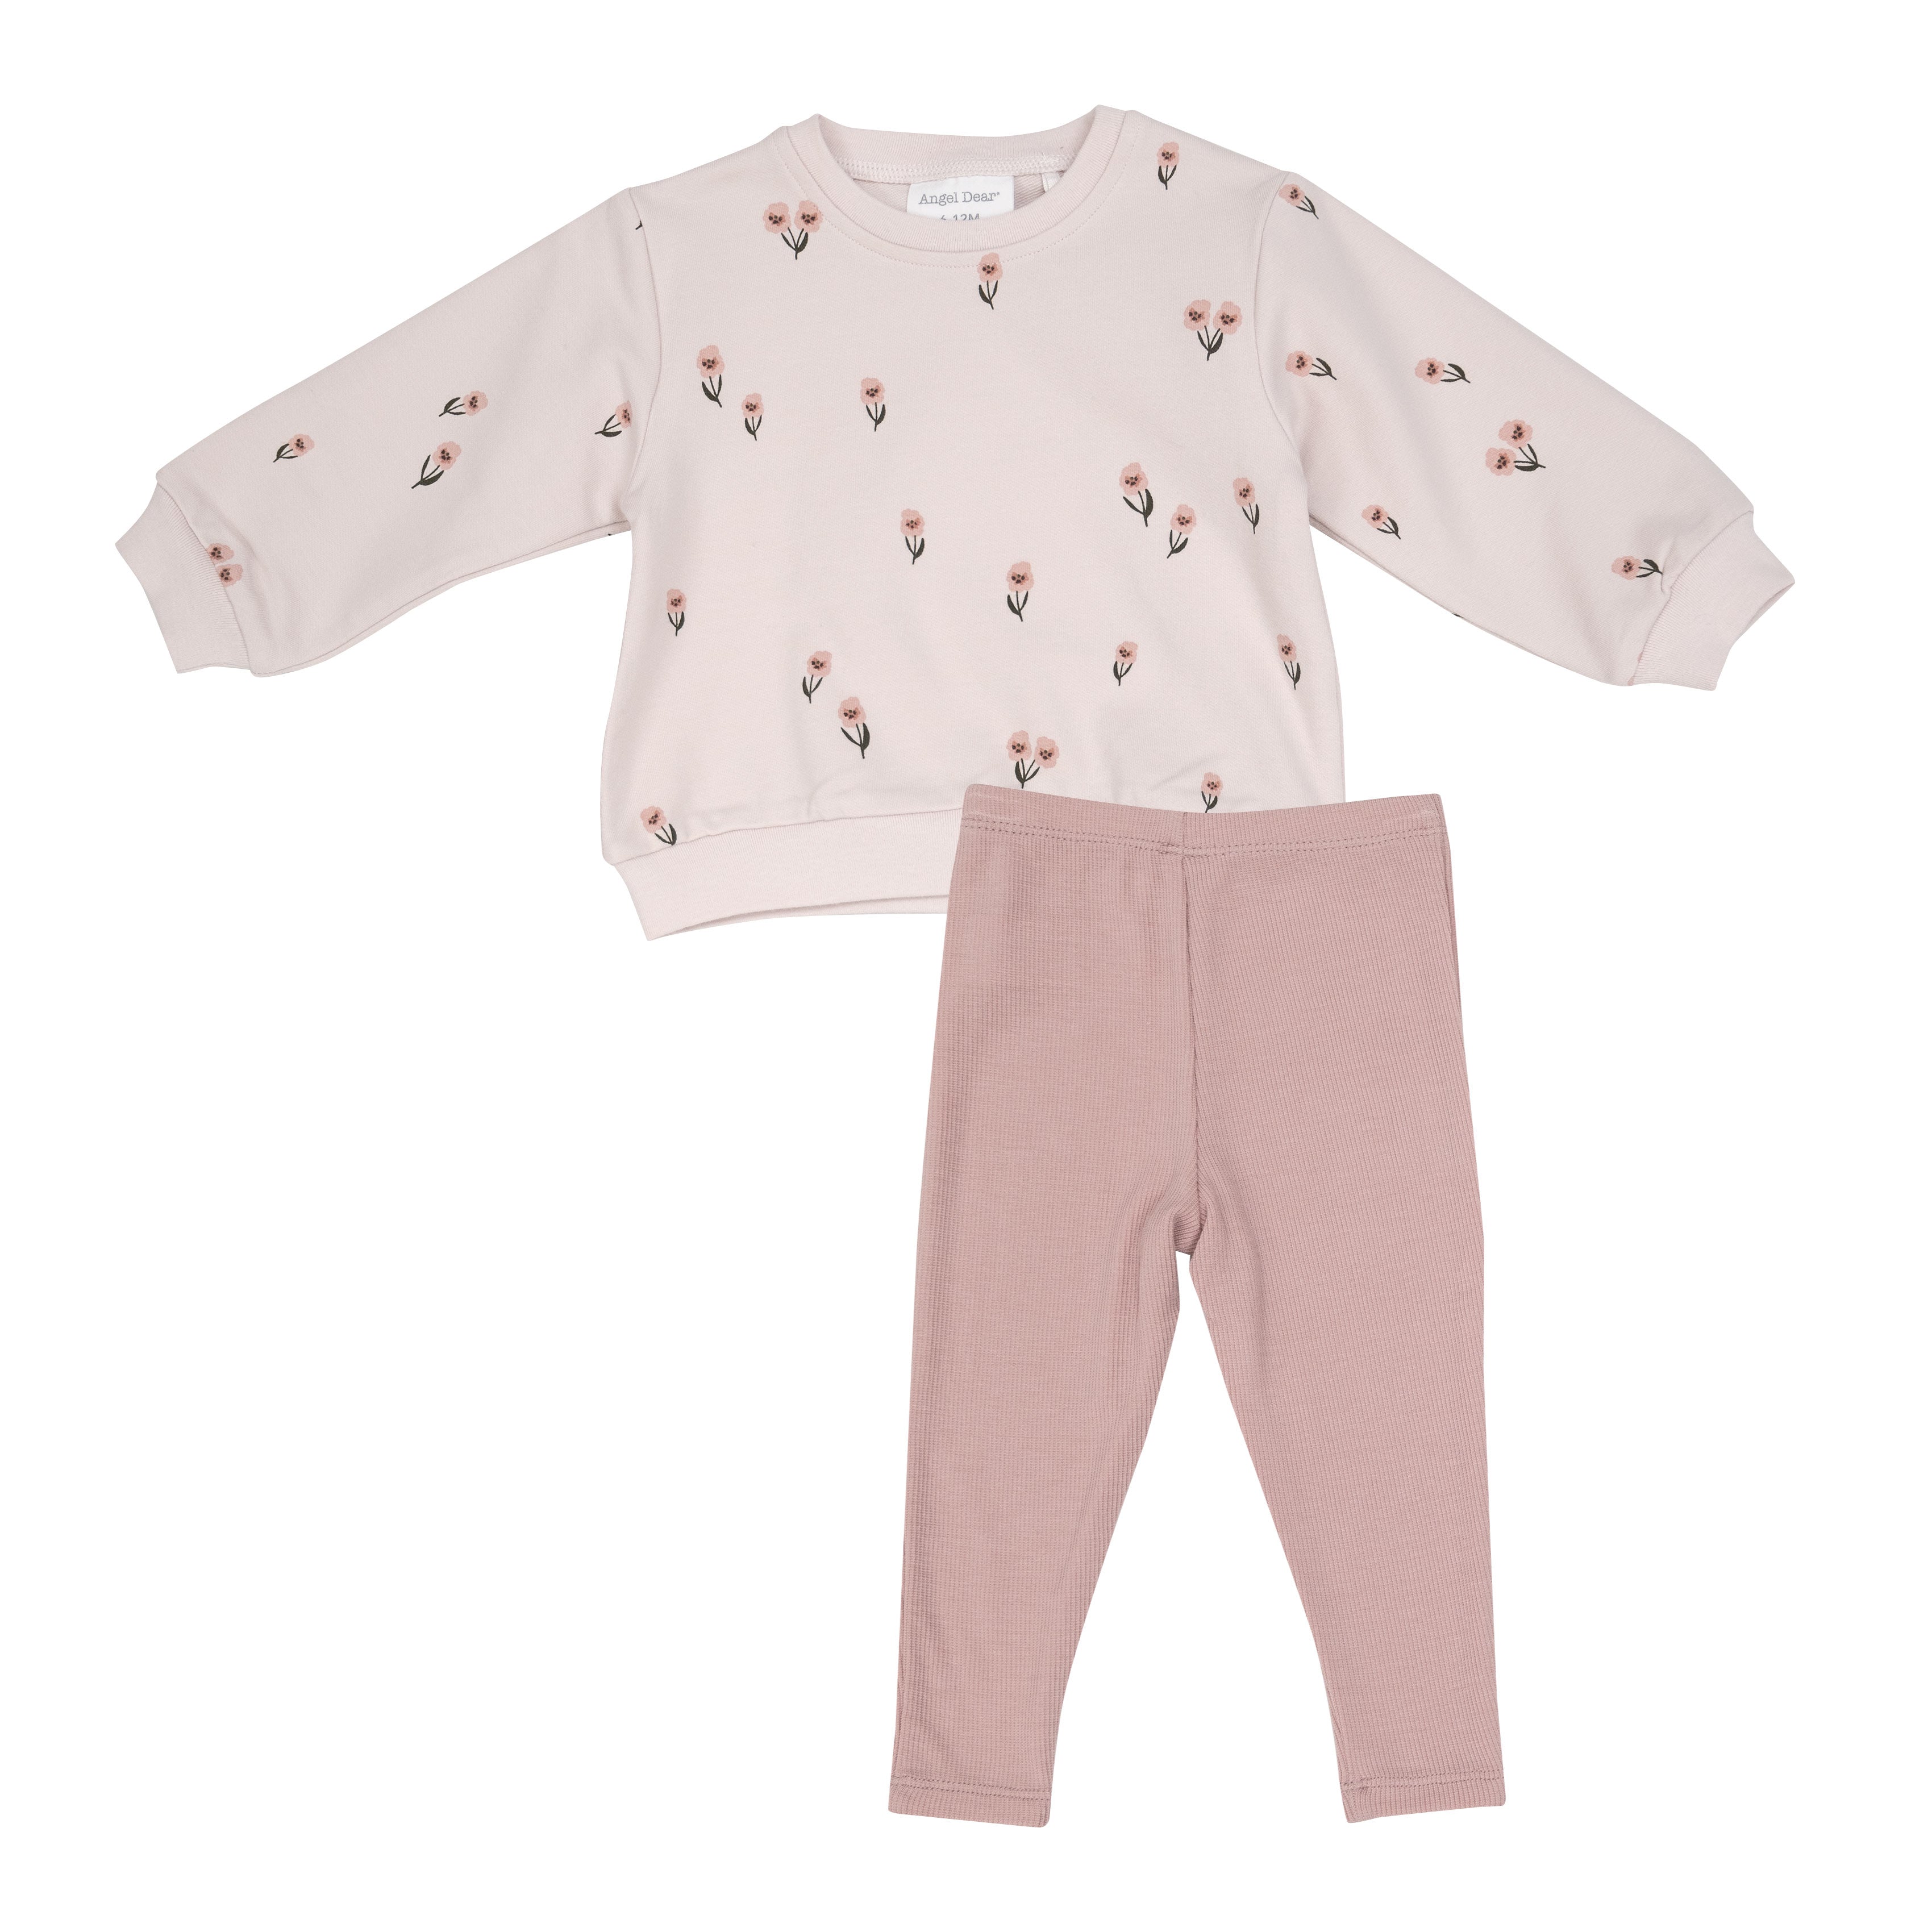 Puffy Oversized Sweatershirt And Rib Legging - Pretty Pink Floral